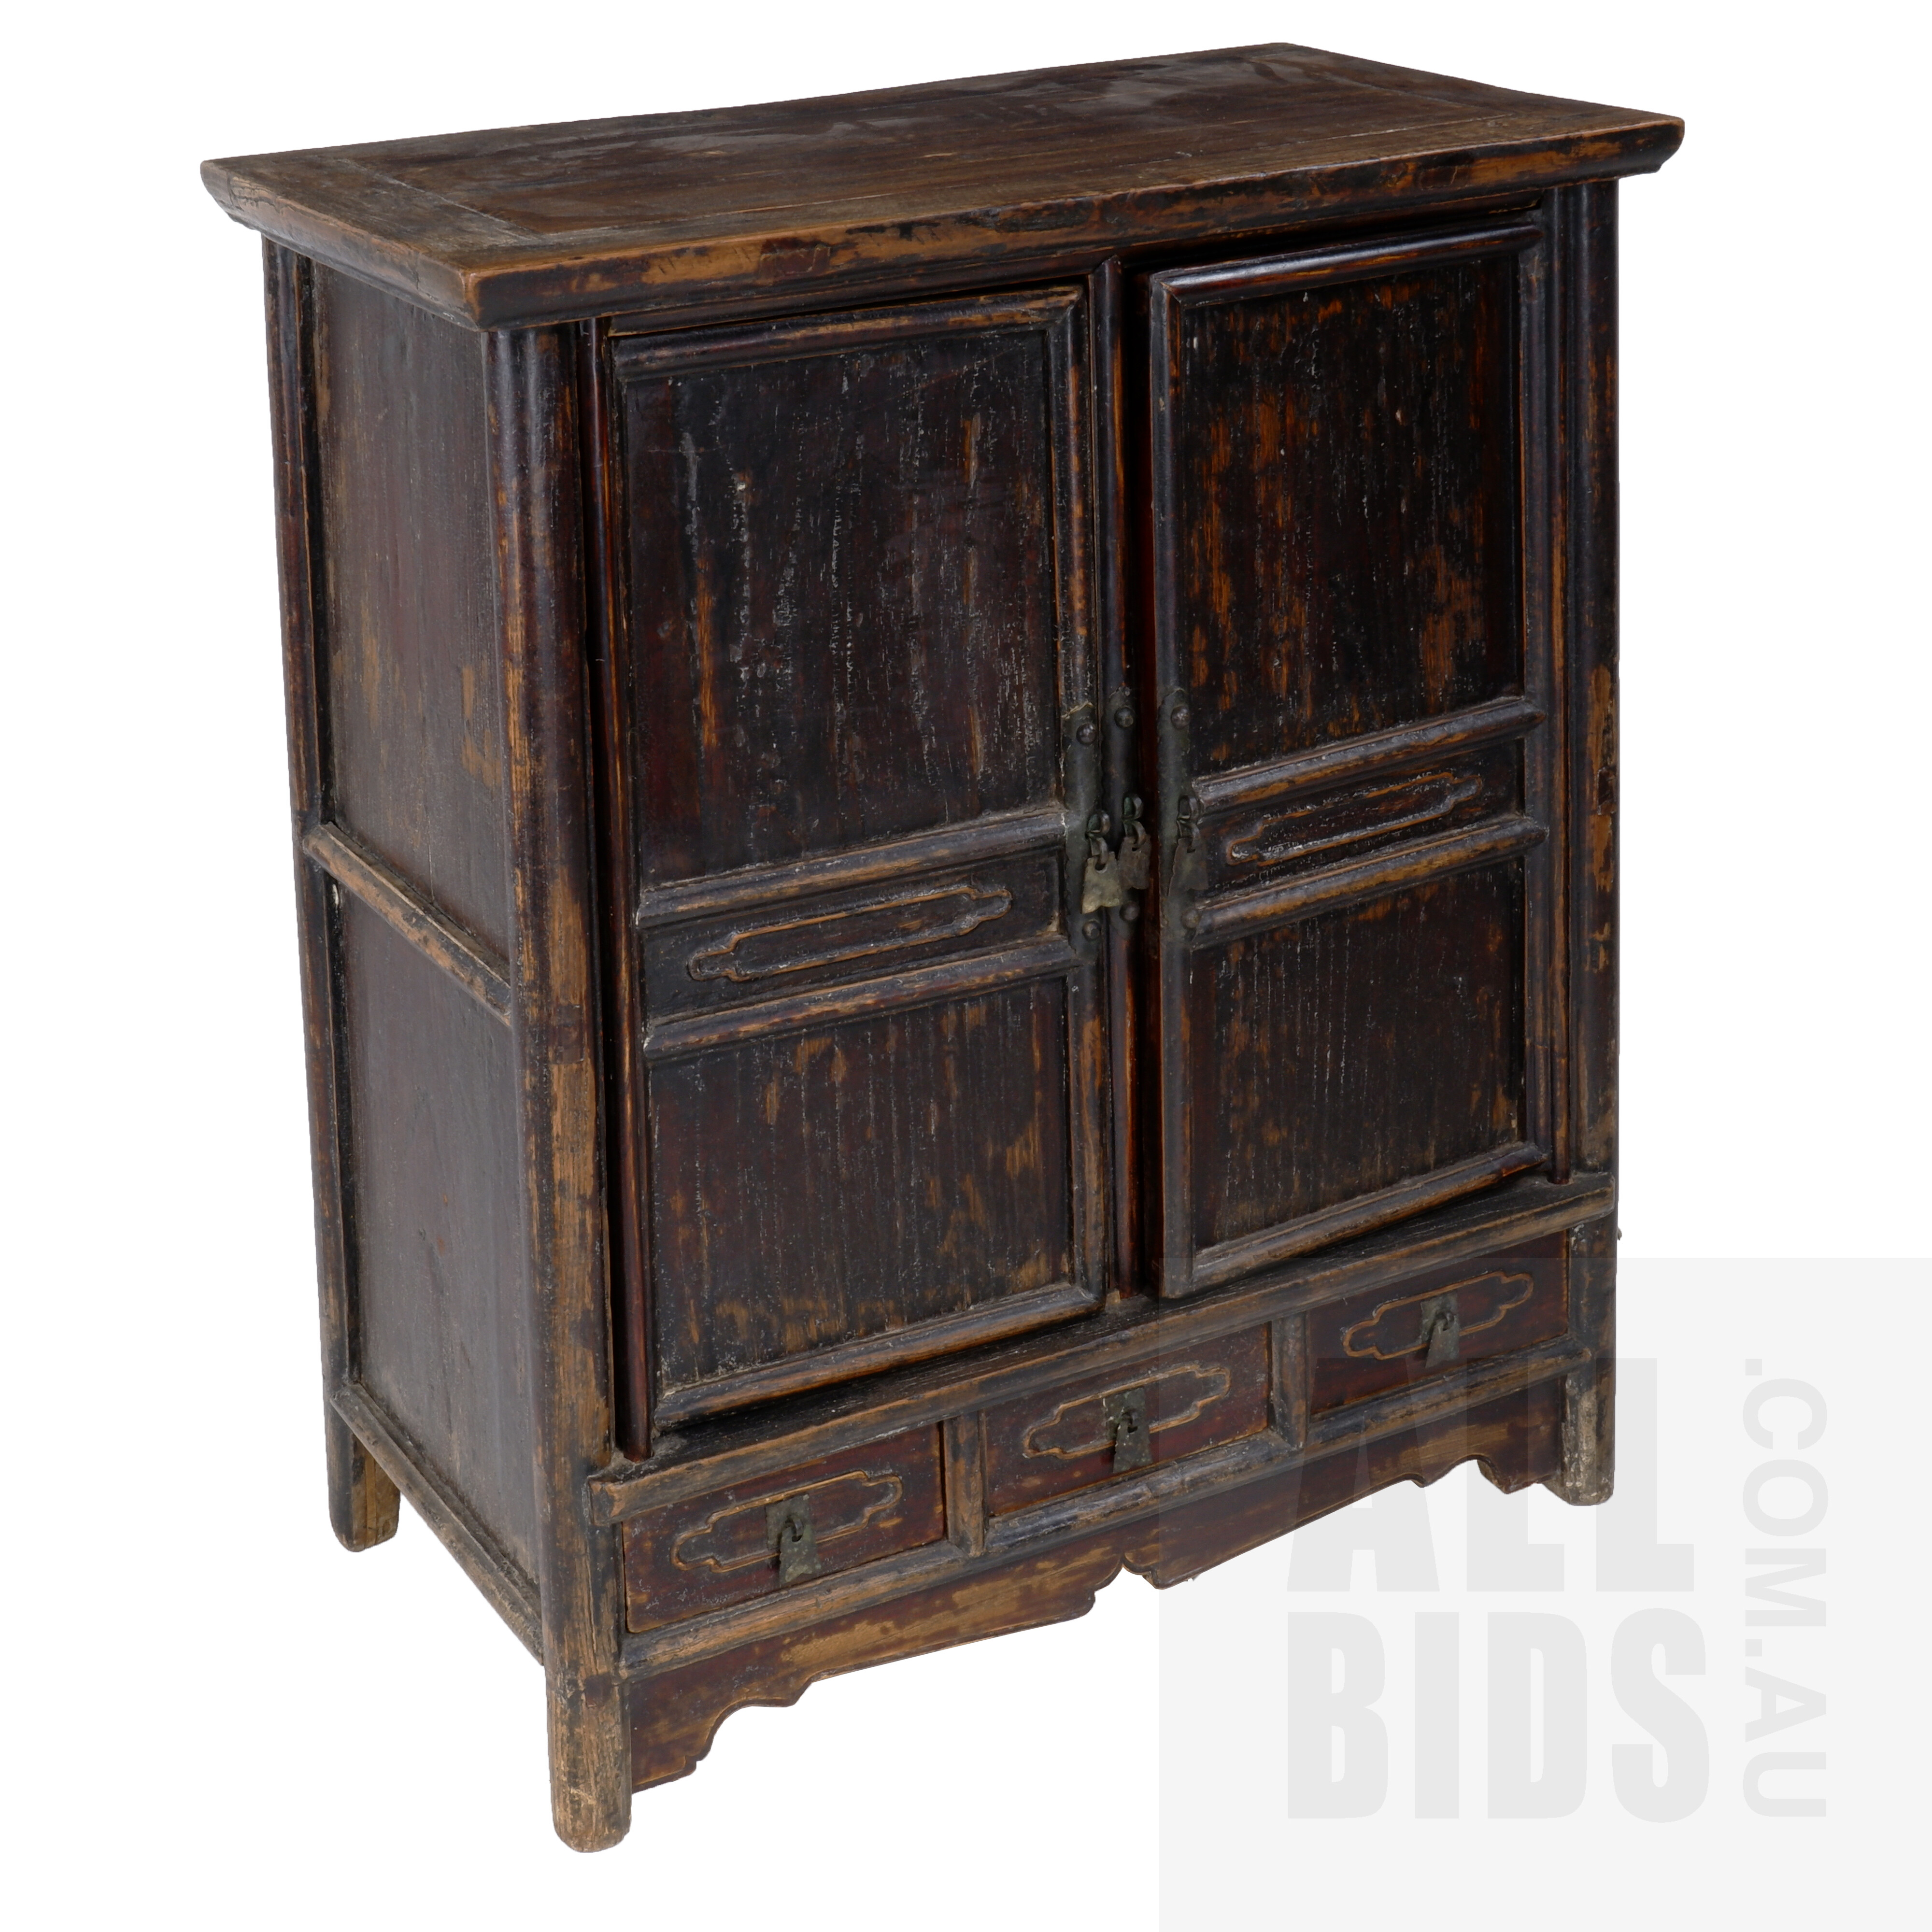 'Antique Chinese Black Lacquered Elmwood Tapered Cabinet, Qing Dynasty, Provenance Humble House'